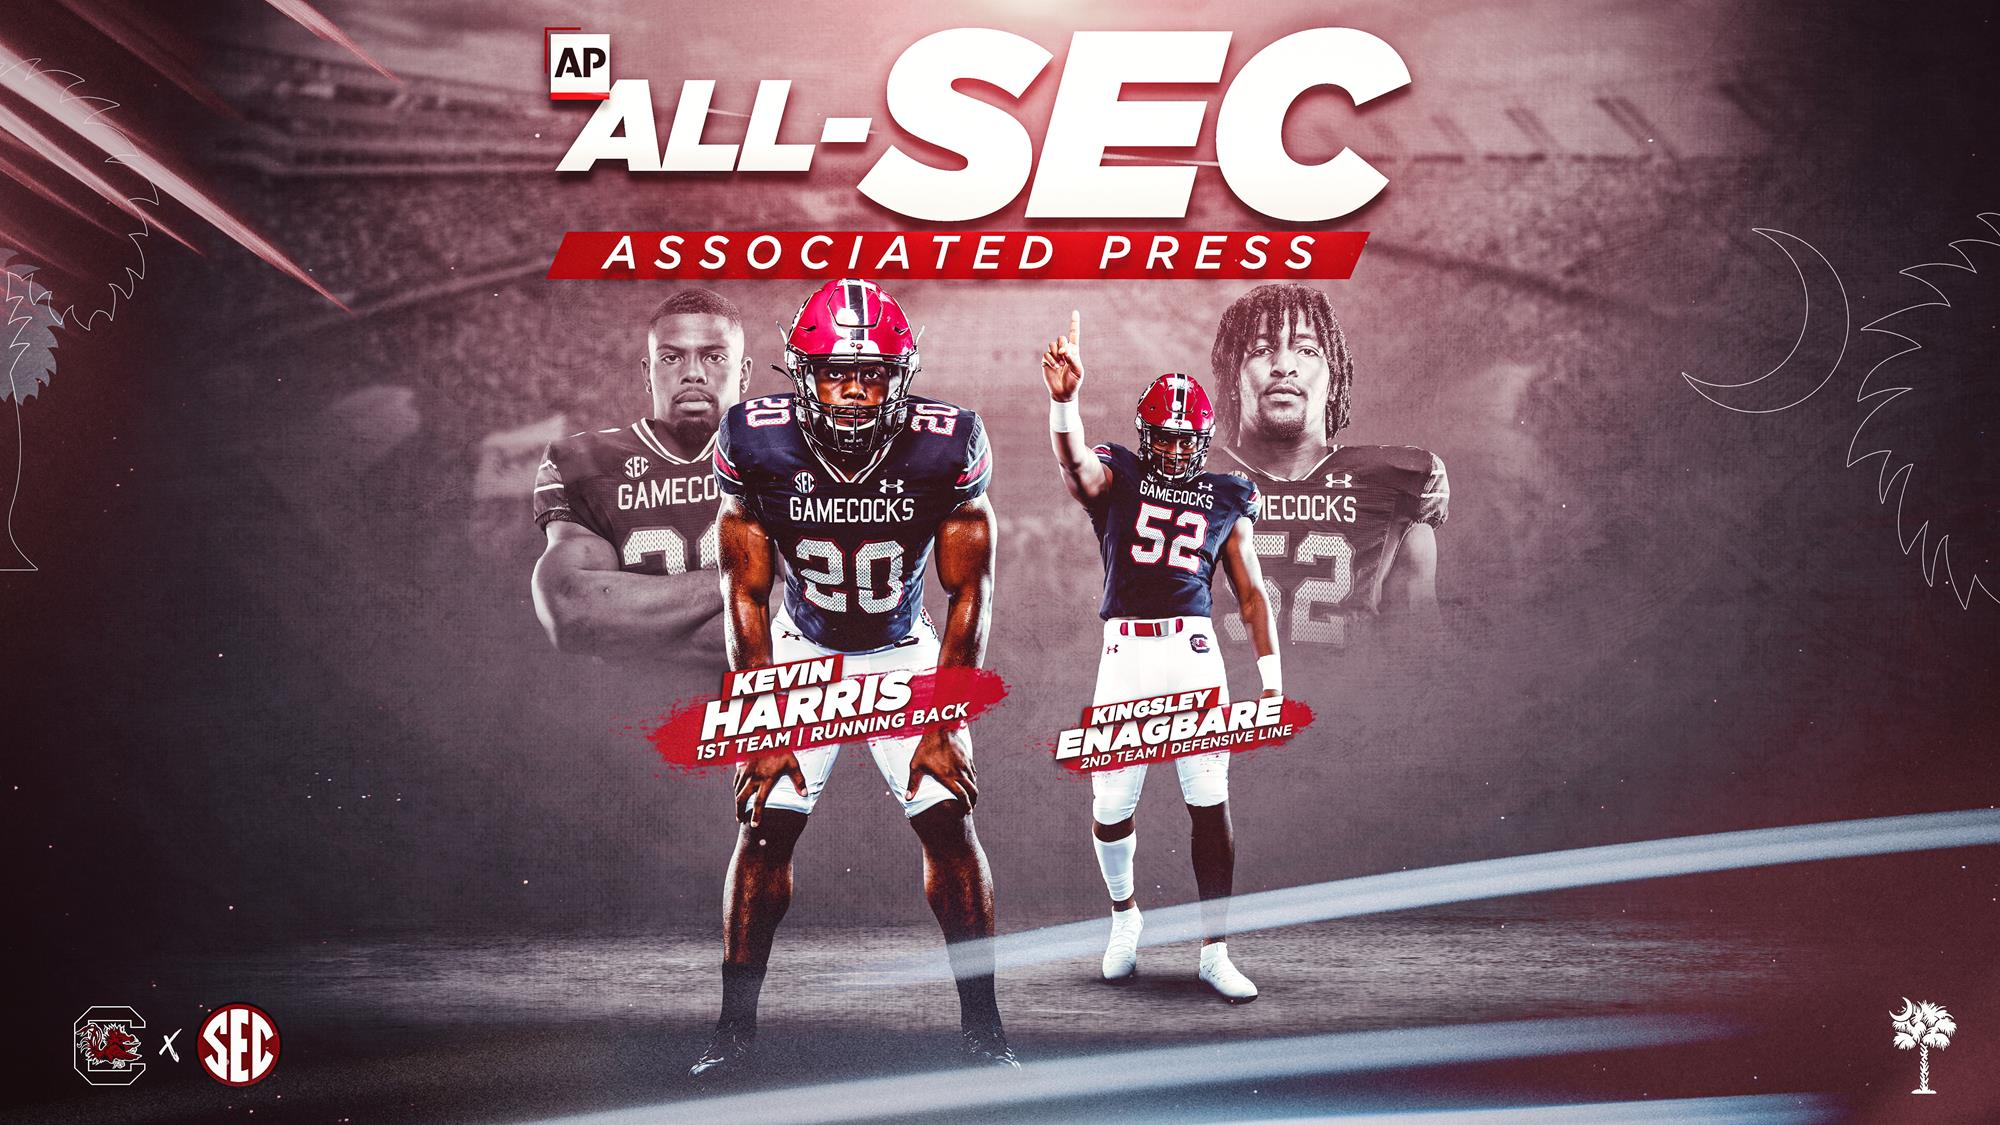 Harris, Enagbare Named to All-SEC Teams by Associated Press